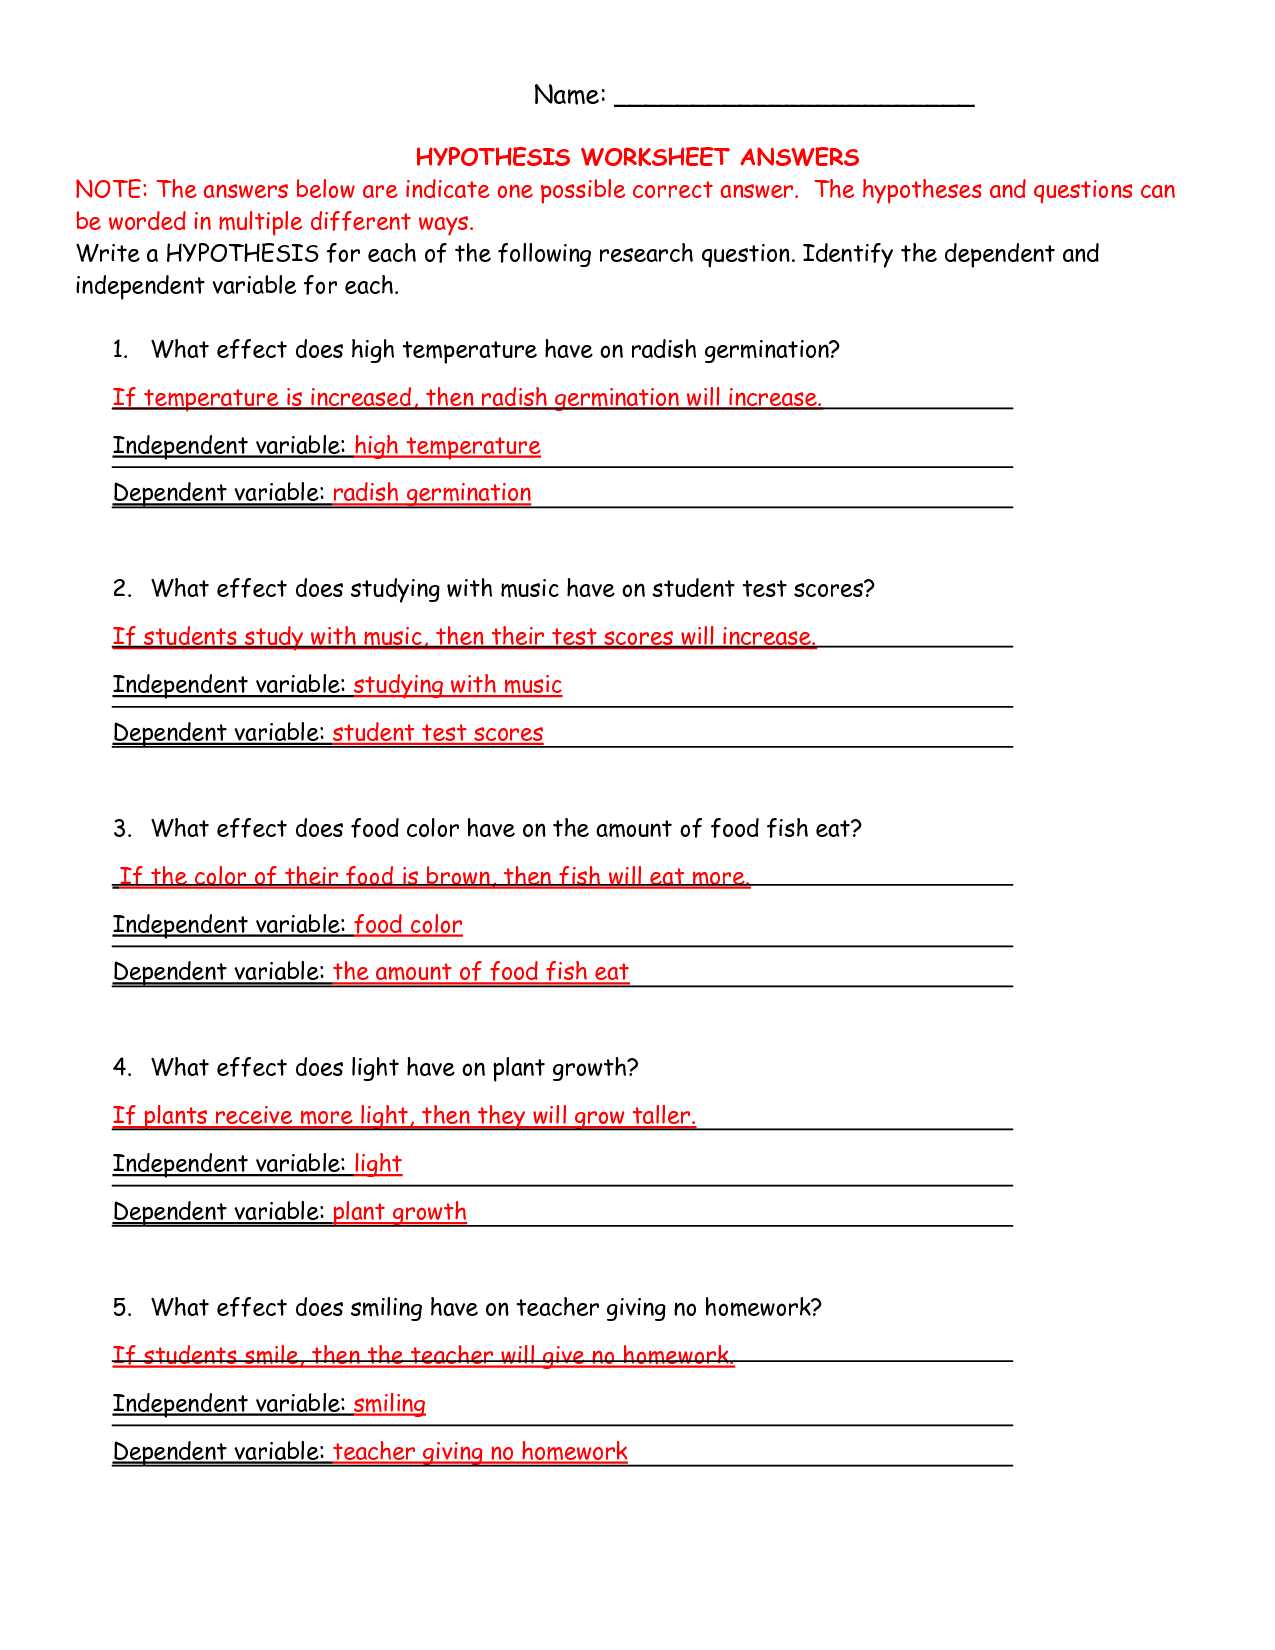 Limiting Reagent Worksheet Answer Key with Work as Well as Ag Science Hypothesis Worksheet Answers Curriculum